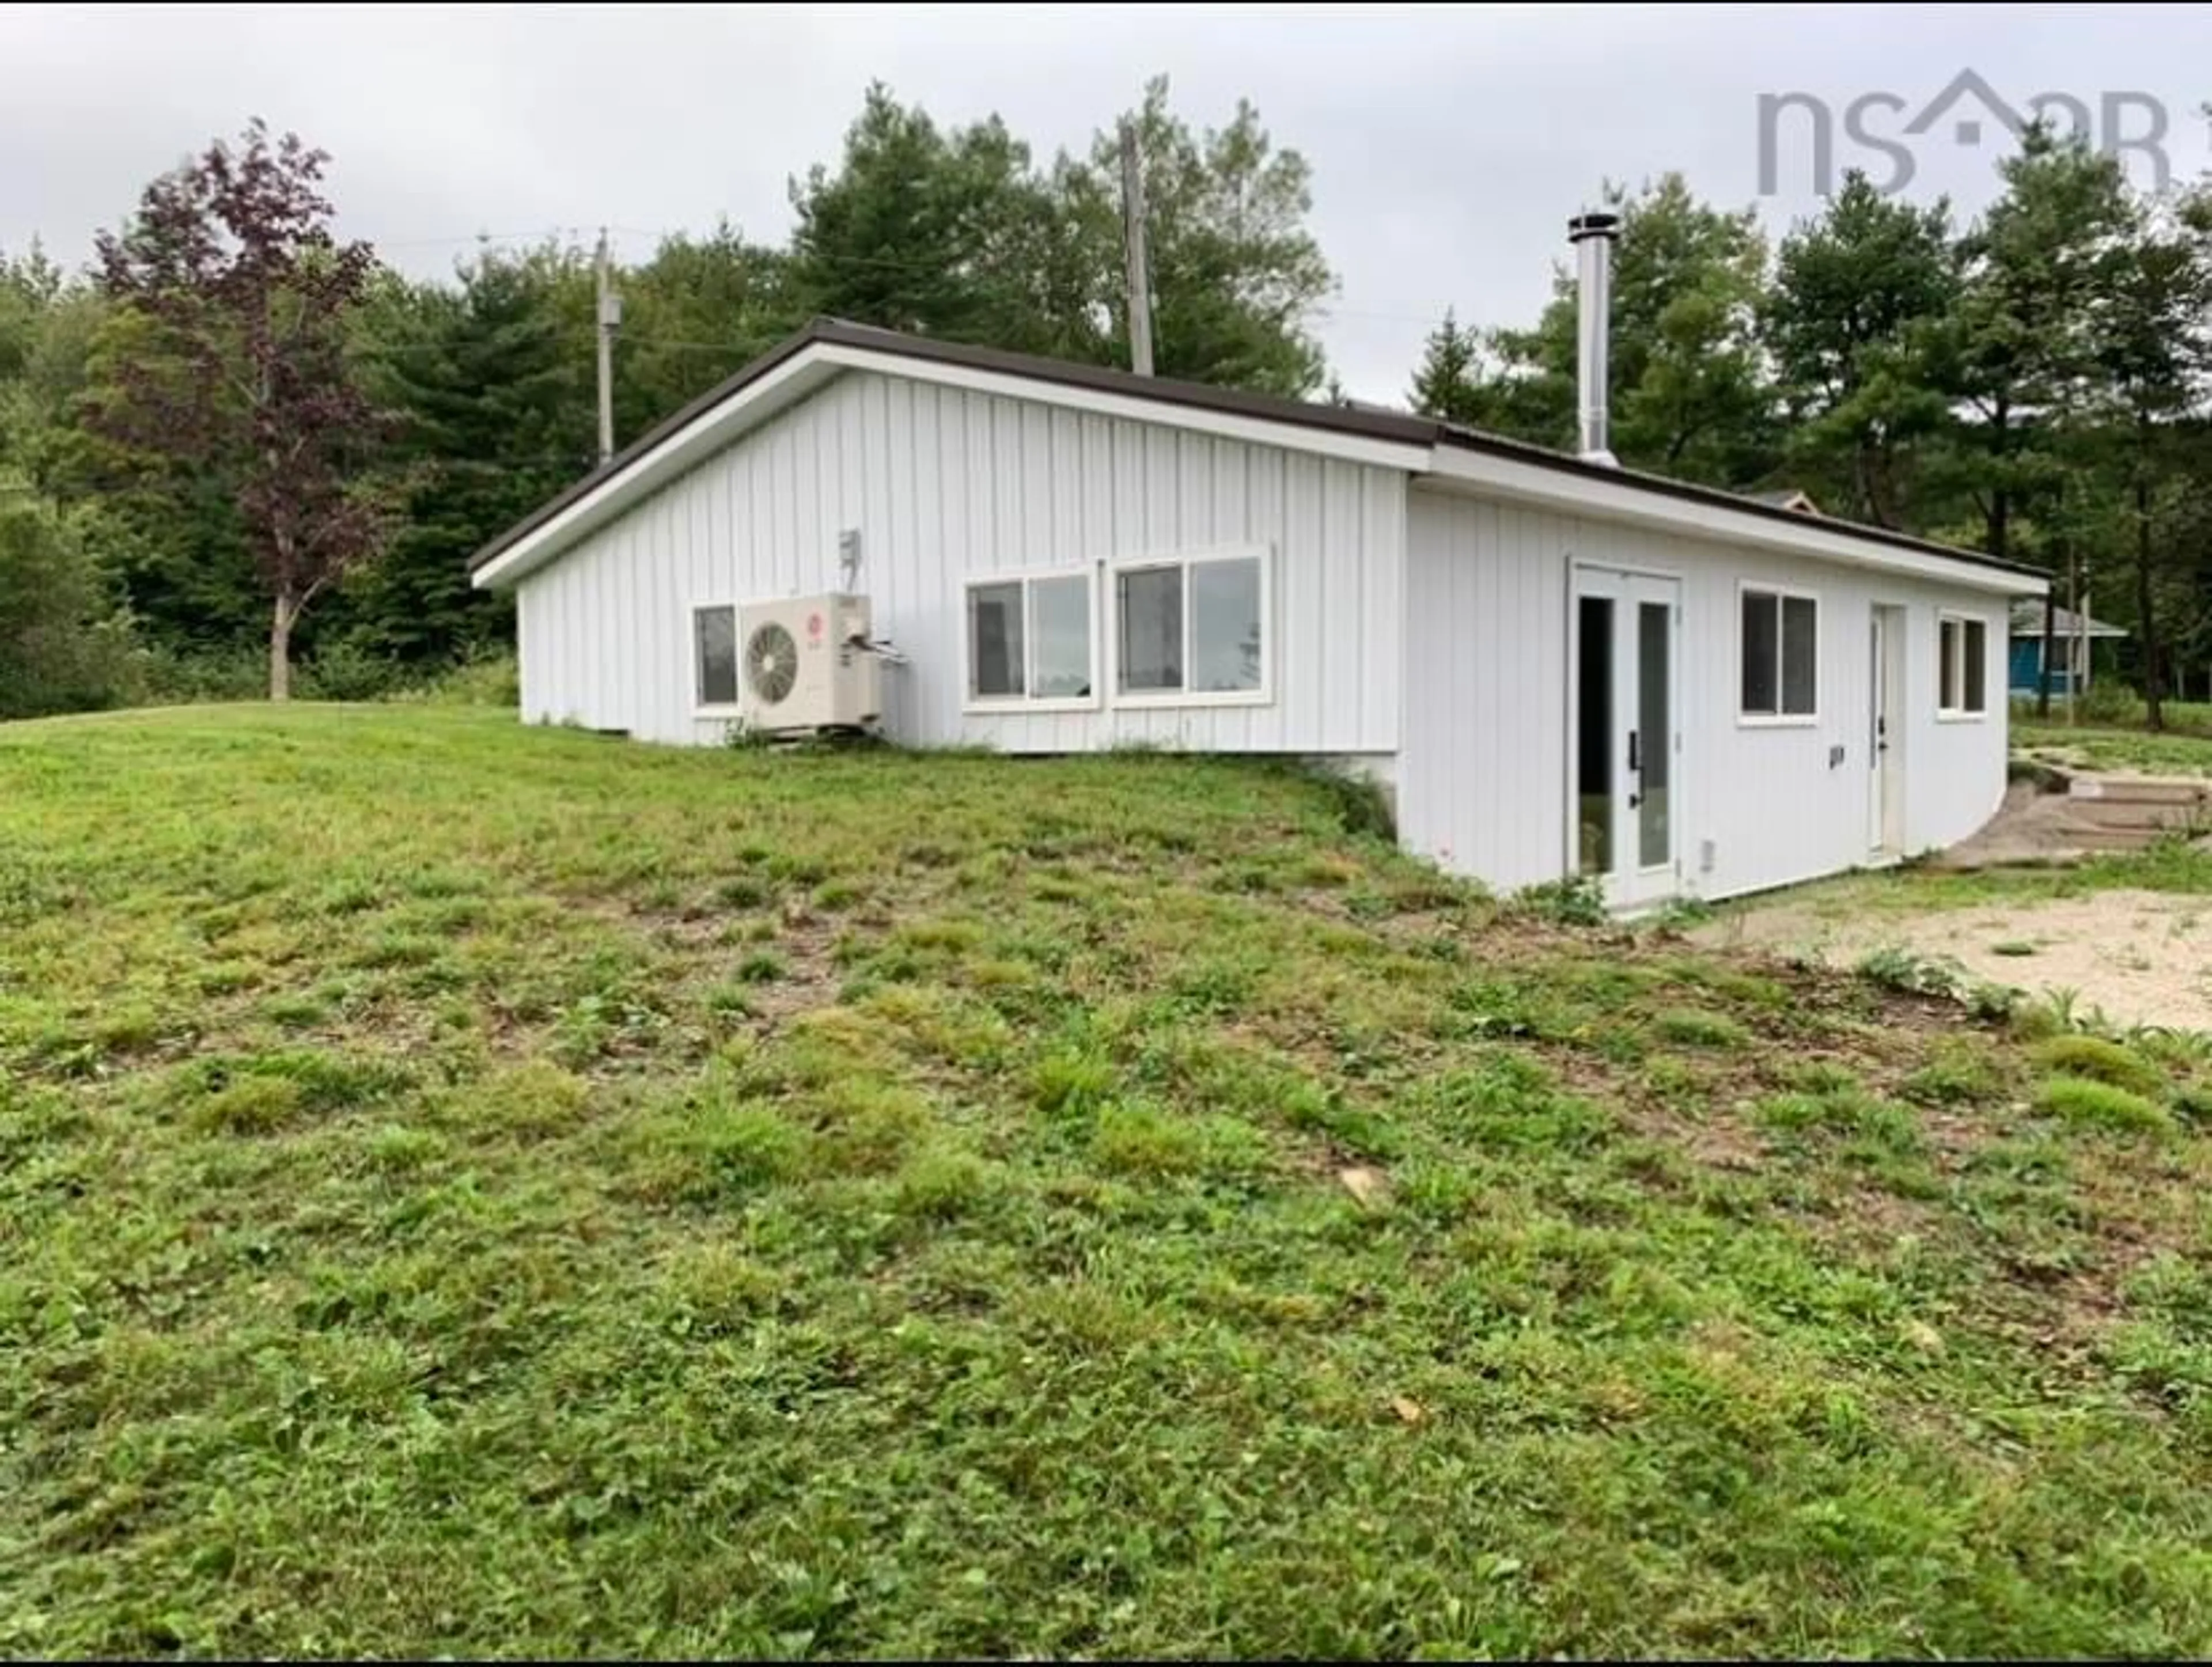 Shed for 331 New Cumberland Rd, Pleasantville Nova Scotia B0R 1G0